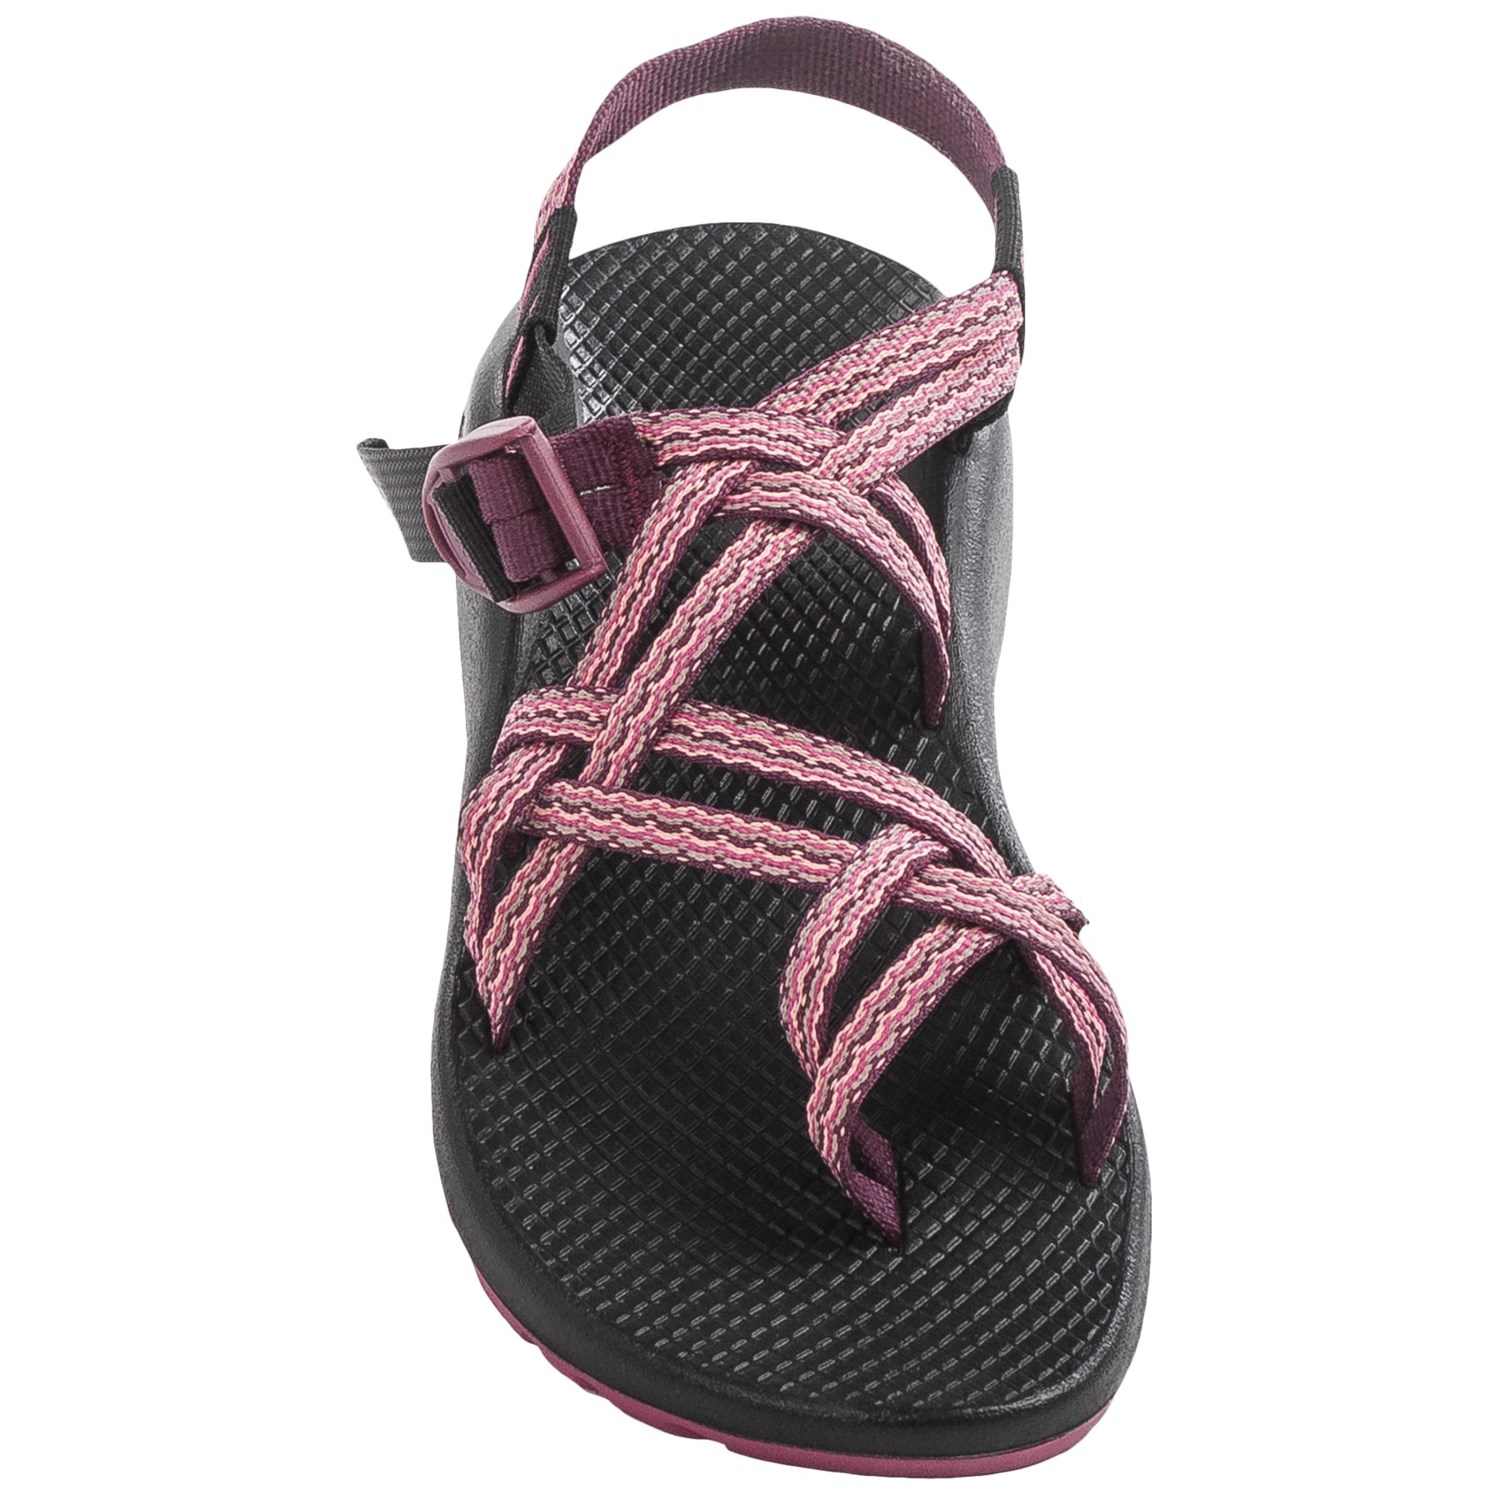 Chaco ZX/2® Classic Sport Sandals (For Women) - Save 42%